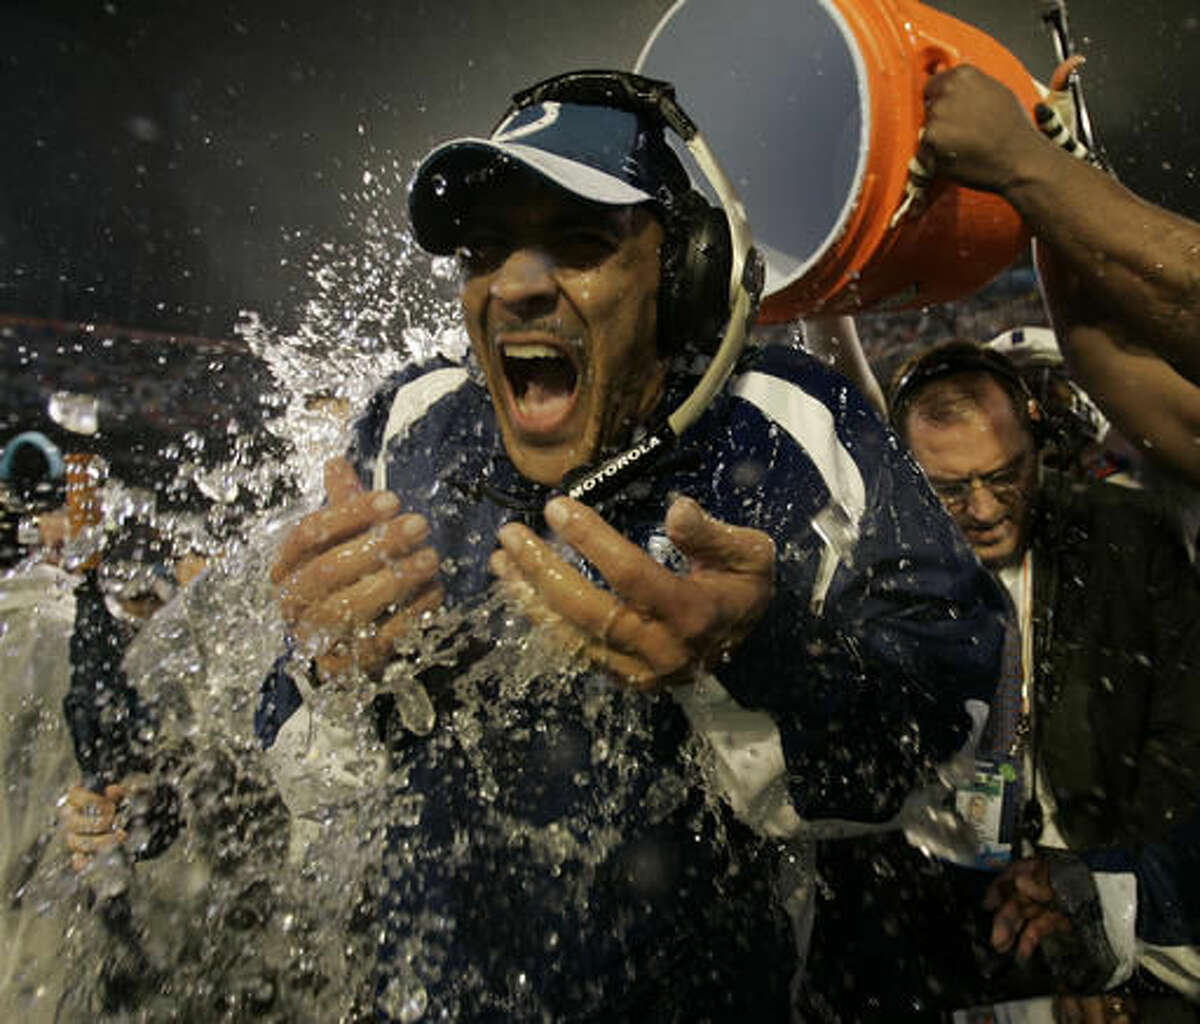 FILE - In this Feb. 4, 2007, file photo, Indianapolis Colts coach Tony Dungy is dunked after the Colts defeated the Chicago Bears, 29-17, in the Super Bowl XLI football game at Dolphin Stadium in Miami. The soft-spoken Dungy, who will be inducted into the Pro Football Hall of Fame on Saturday, Aug. 6, 2016. (AP Photo/David J. Phillip, File)